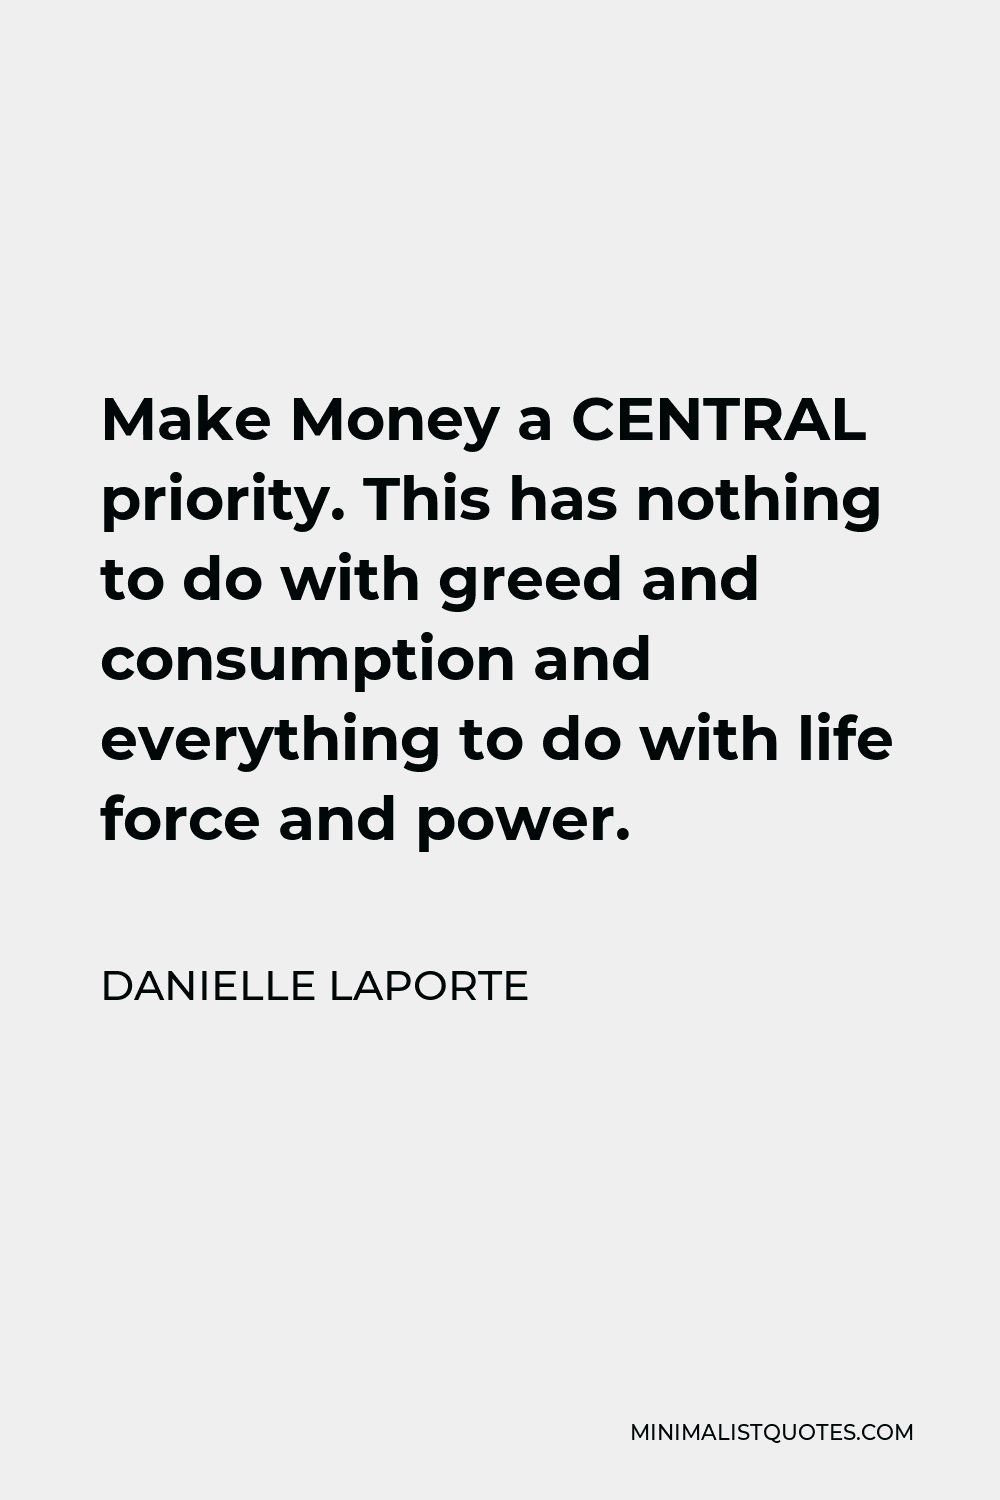 Danielle LaPorte Quote - Make Money a CENTRAL priority. This has nothing to do with greed and consumption and everything to do with life force and power.